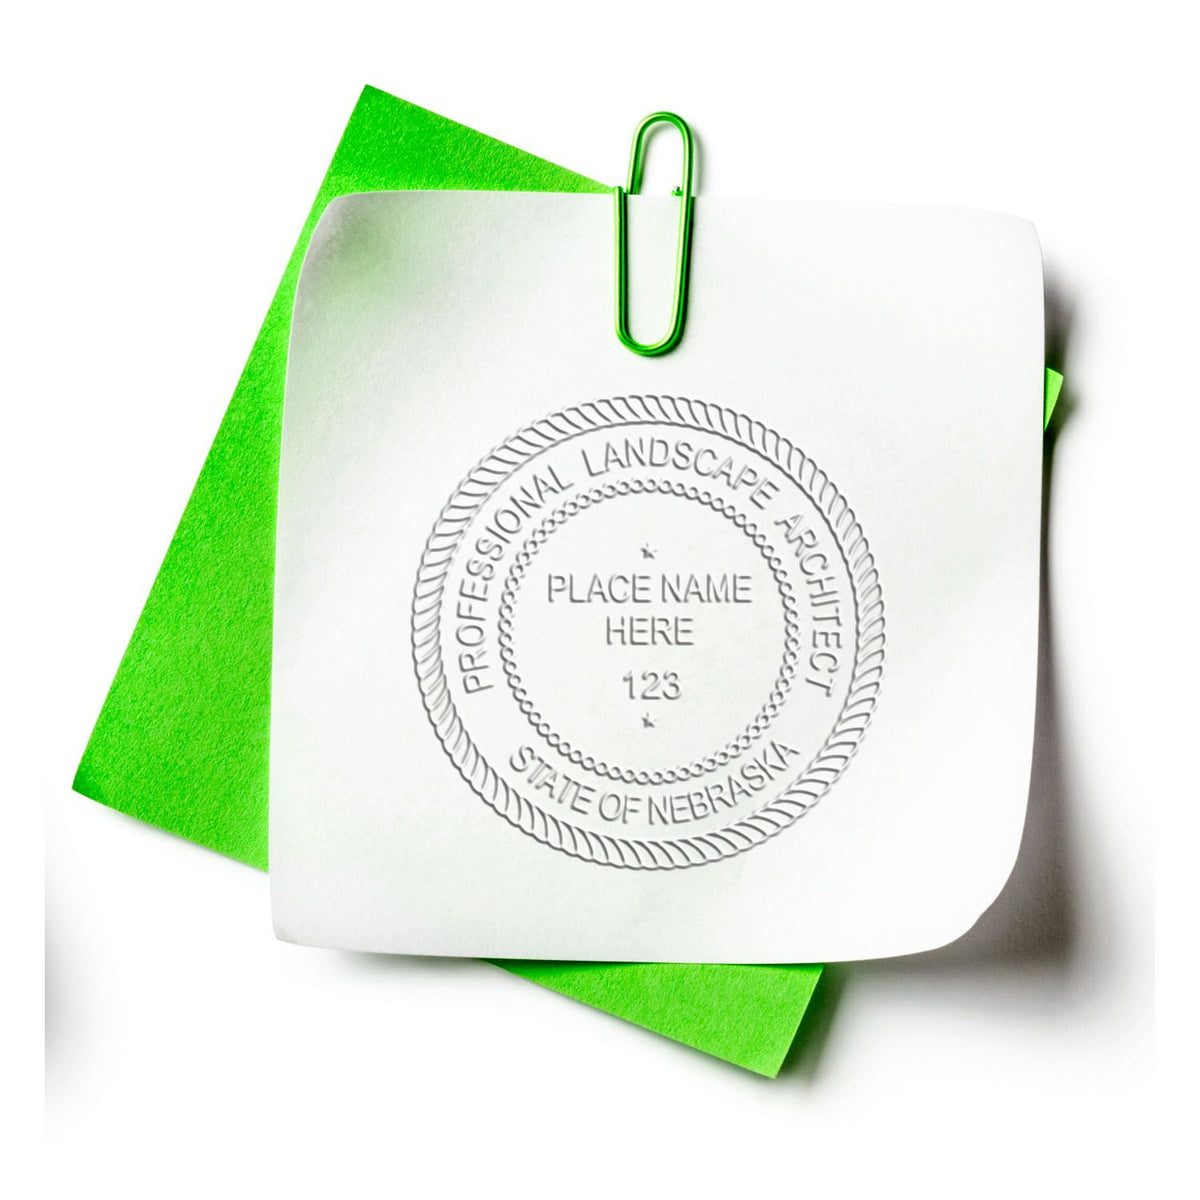 An alternative view of the Gift Nebraska Landscape Architect Seal stamped on a sheet of paper showing the image in use